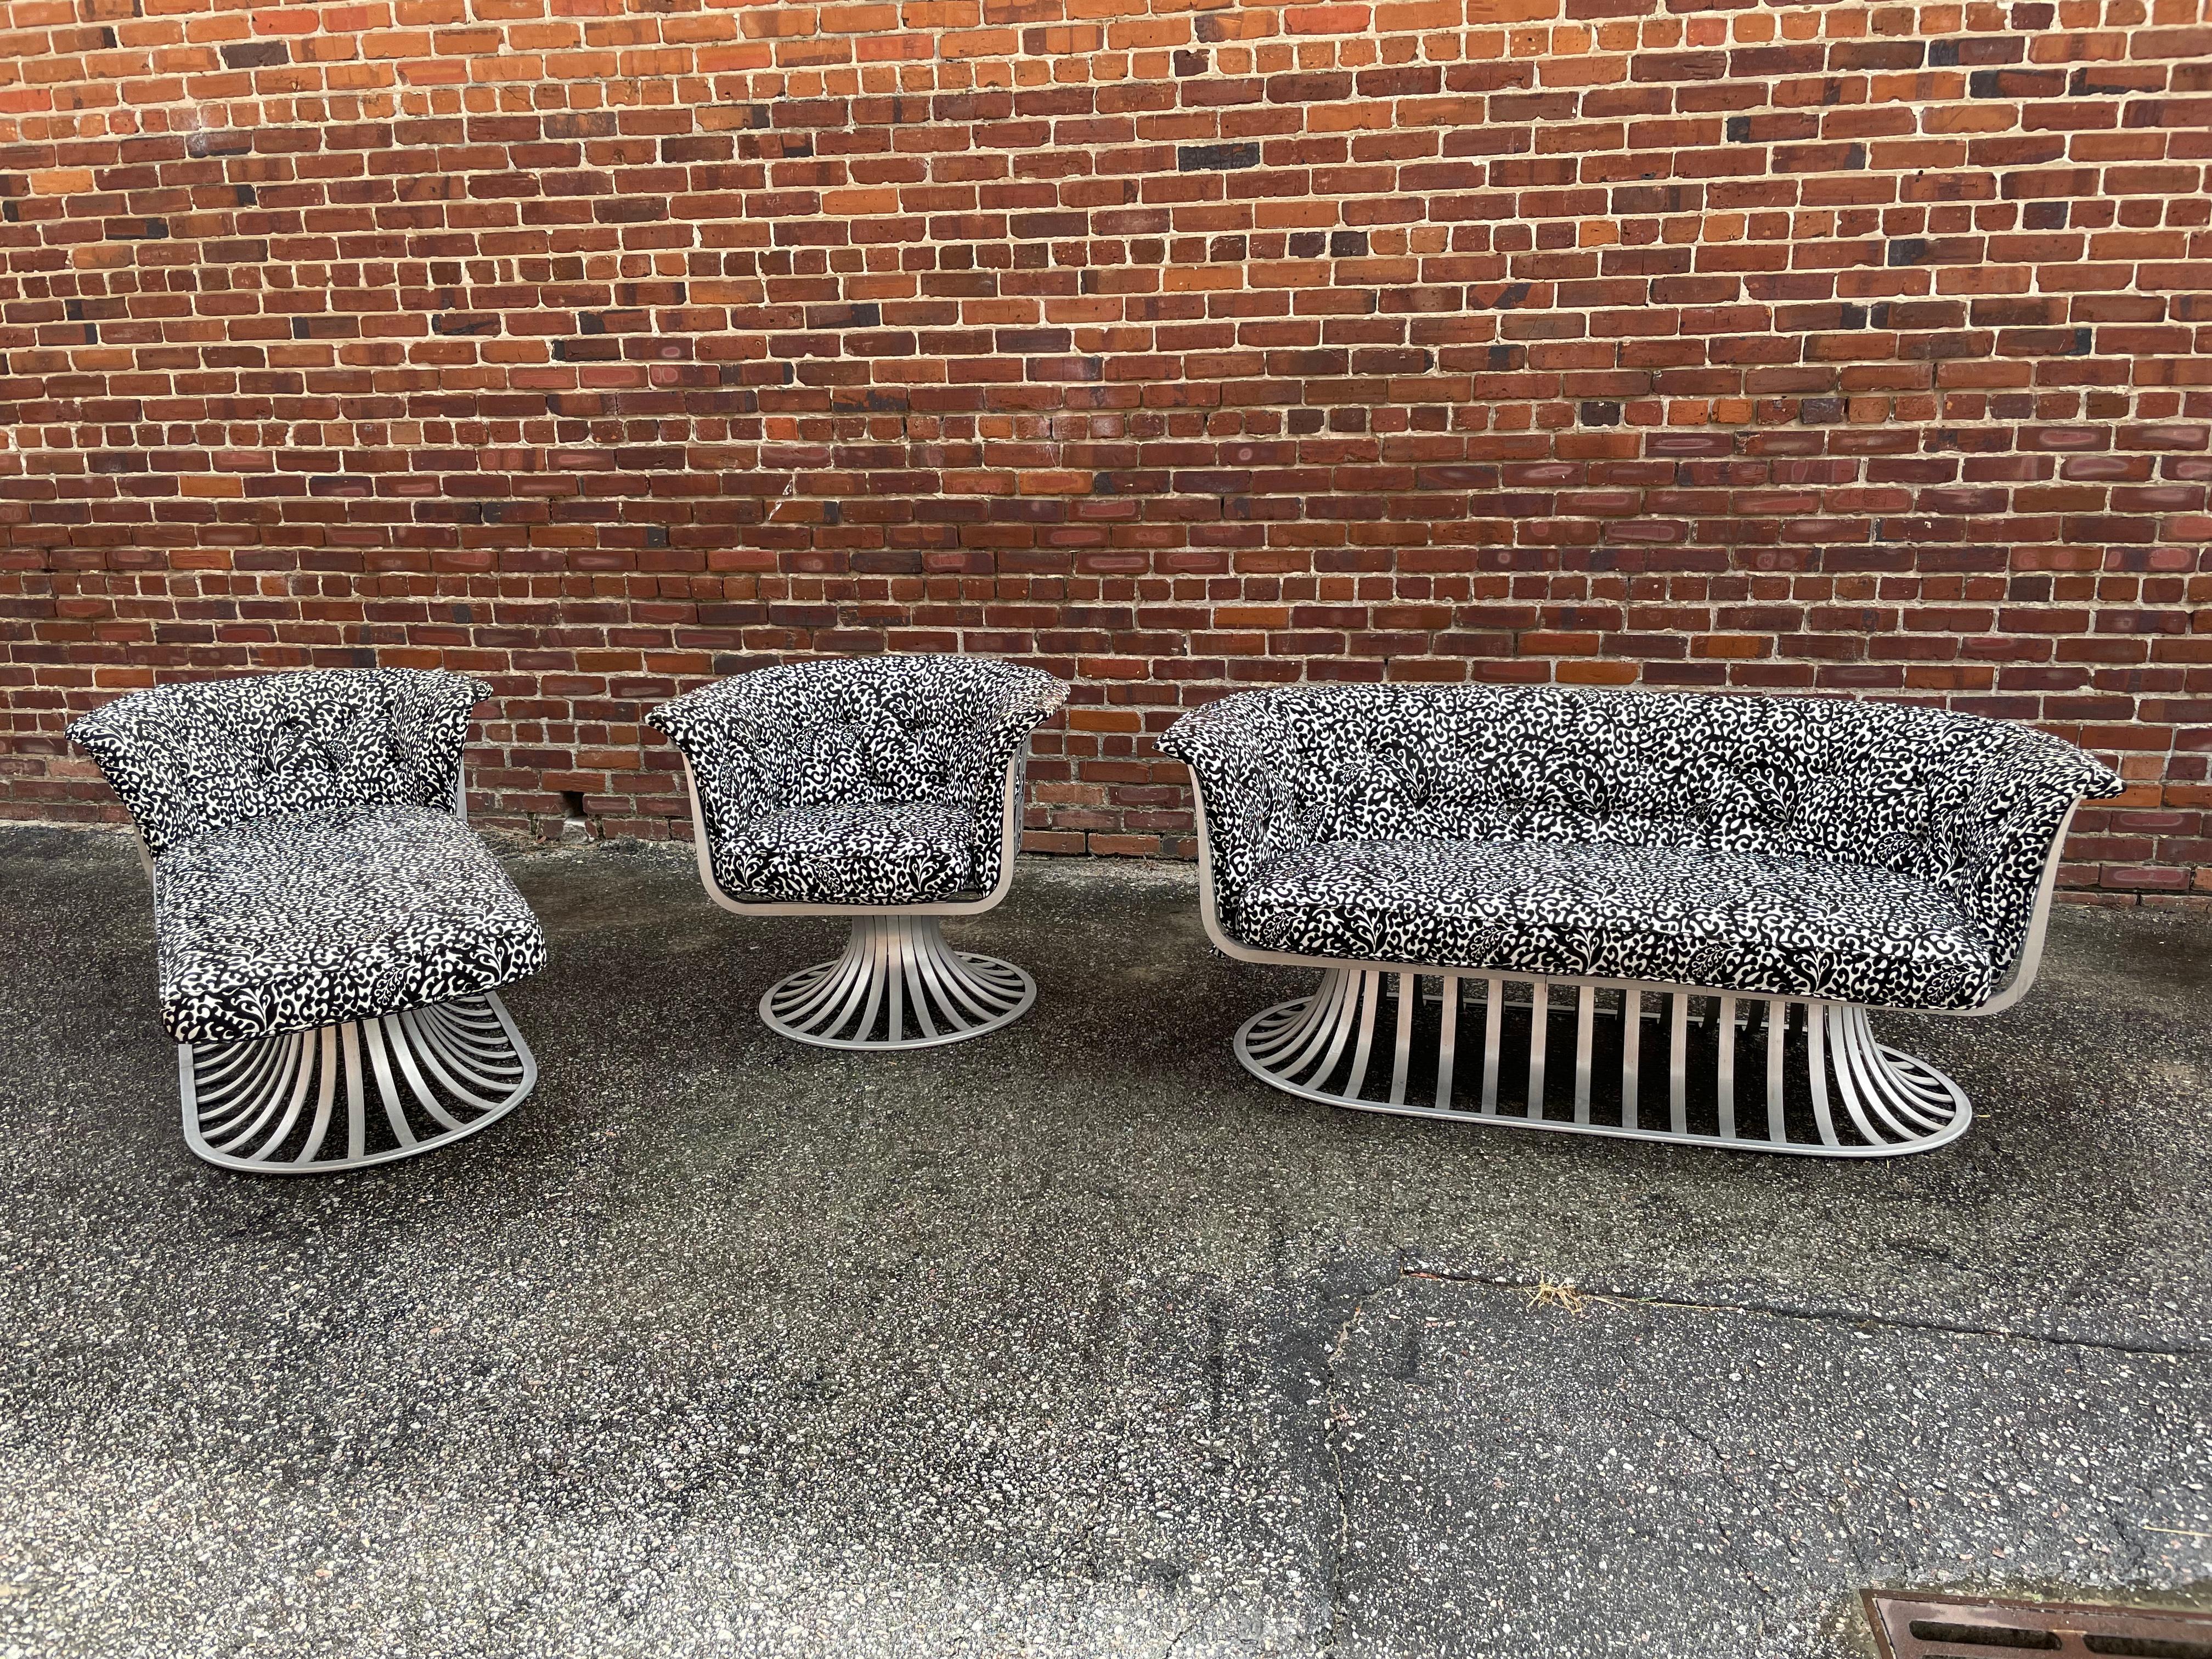 As a three piece, this Herbert Saiger for Woodard aluminum piece patio set with chaise, swivel lounge chair, and settee is in excellent condition, including its gorgeous original paisley fabric. 

Swivel chair
32” W x 30” D x 28” H x seat 19” W x